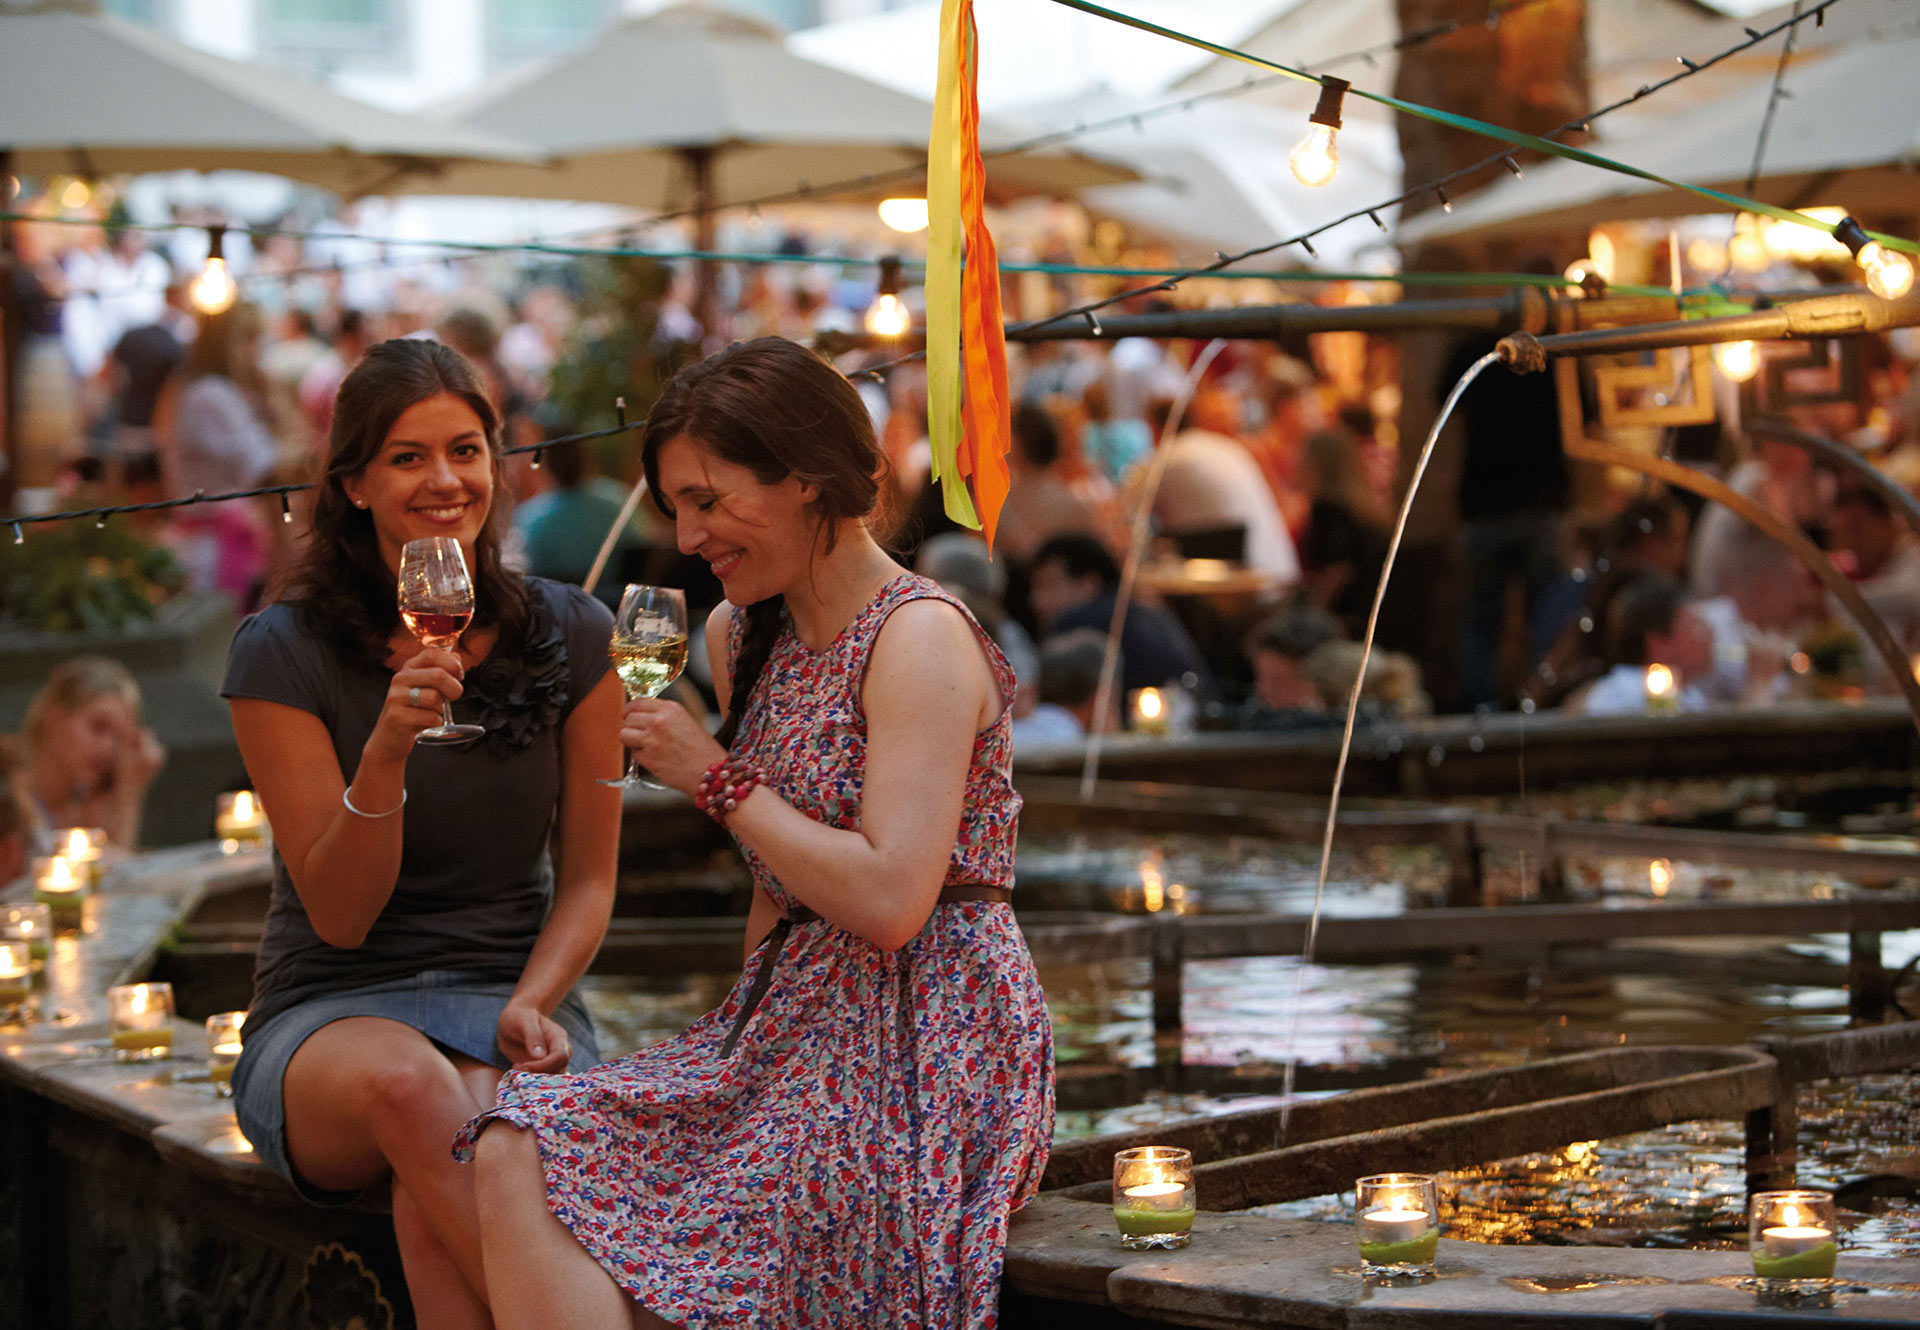 Two young women sit at the wine village fountain and each drink from a glass of wine.